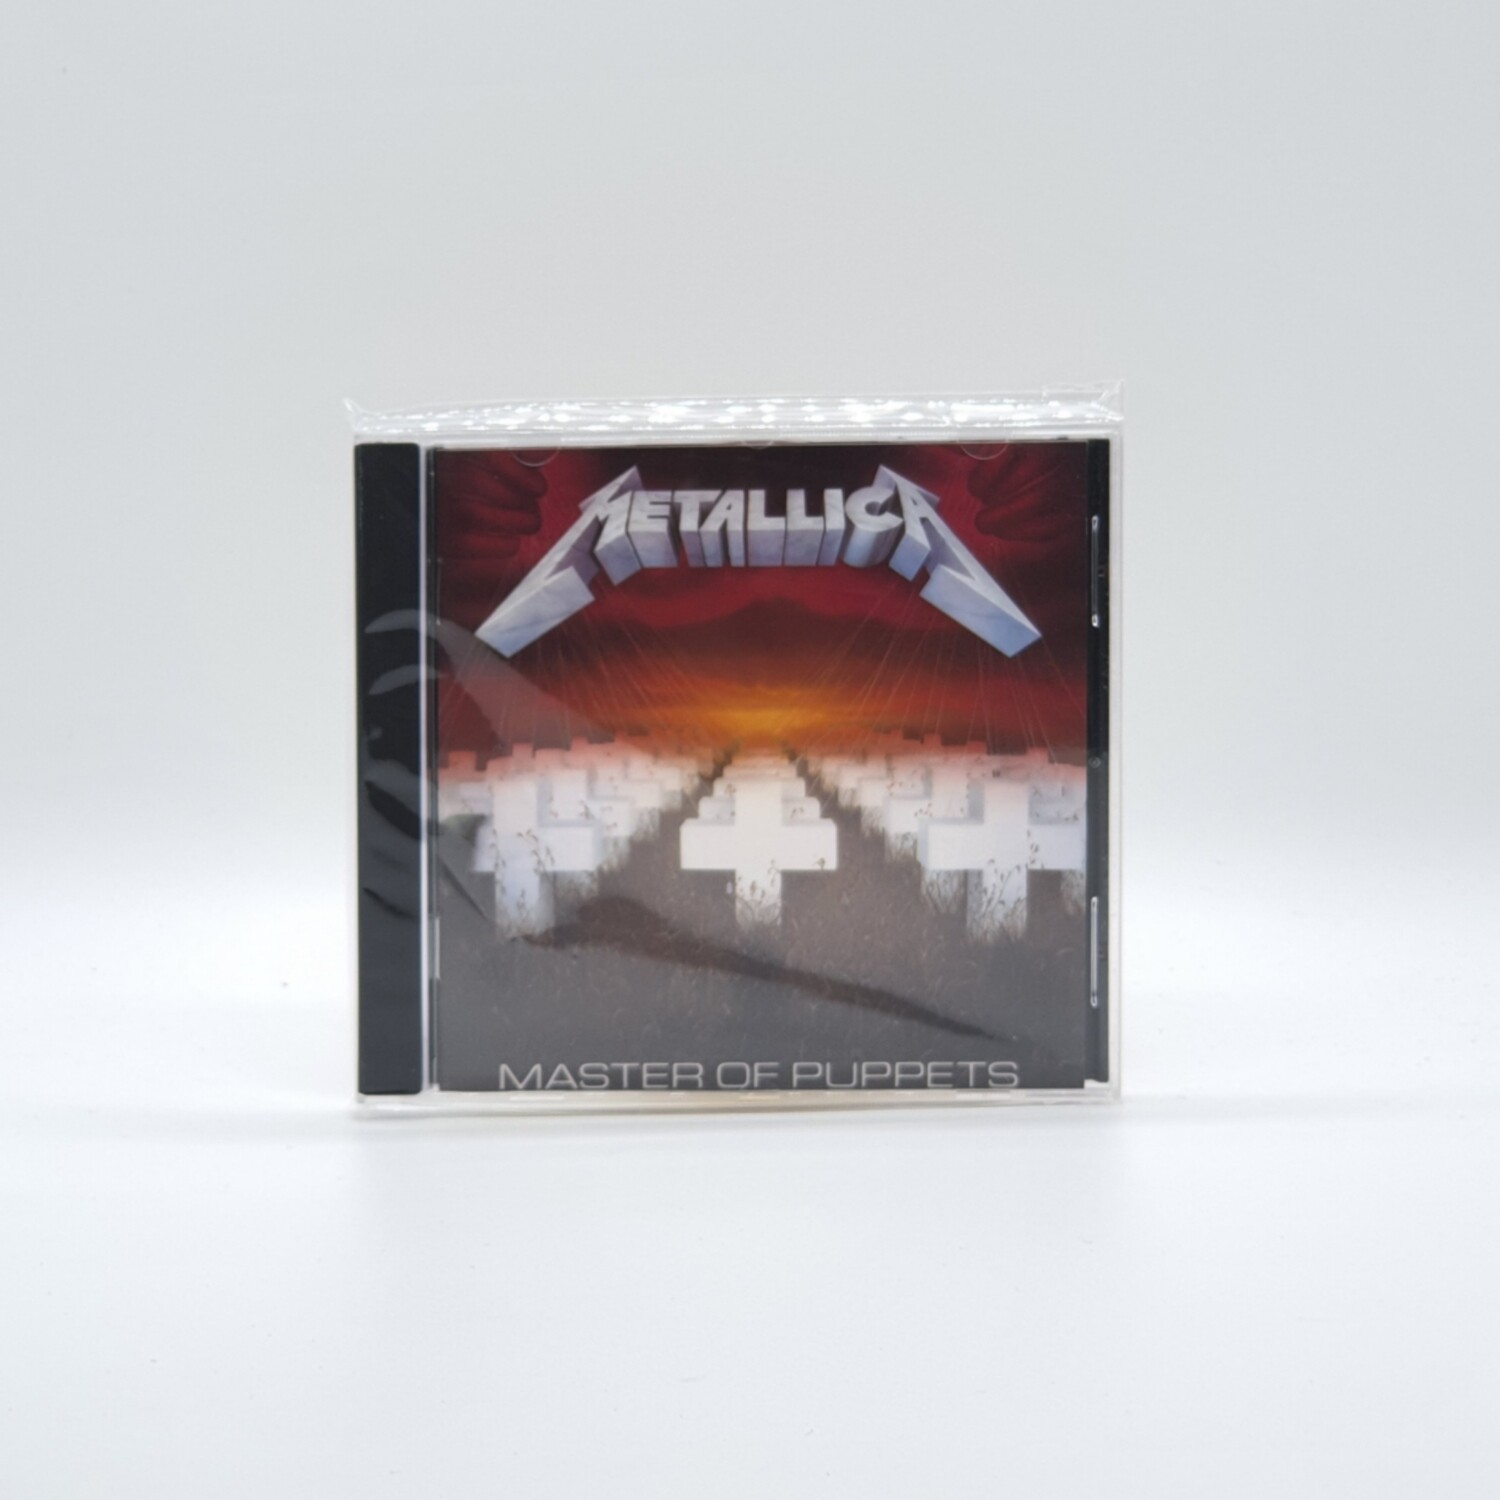 [USED] METALLICA -MASTER OF PUPPETS- CD